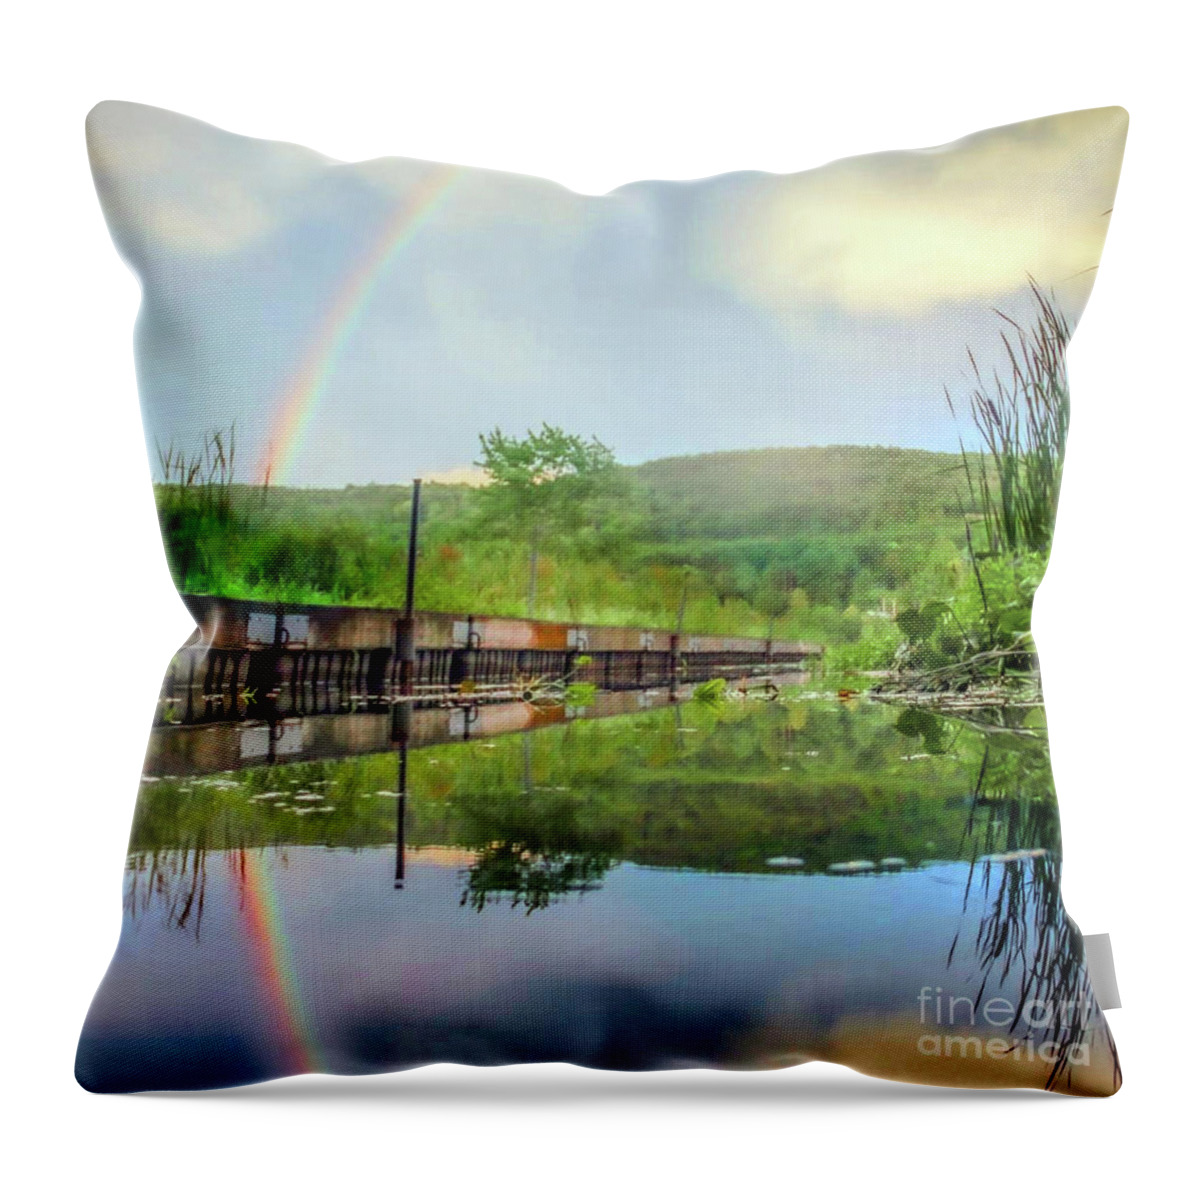 Reflection Throw Pillow featuring the photograph Rainbow Art by Doc Braham